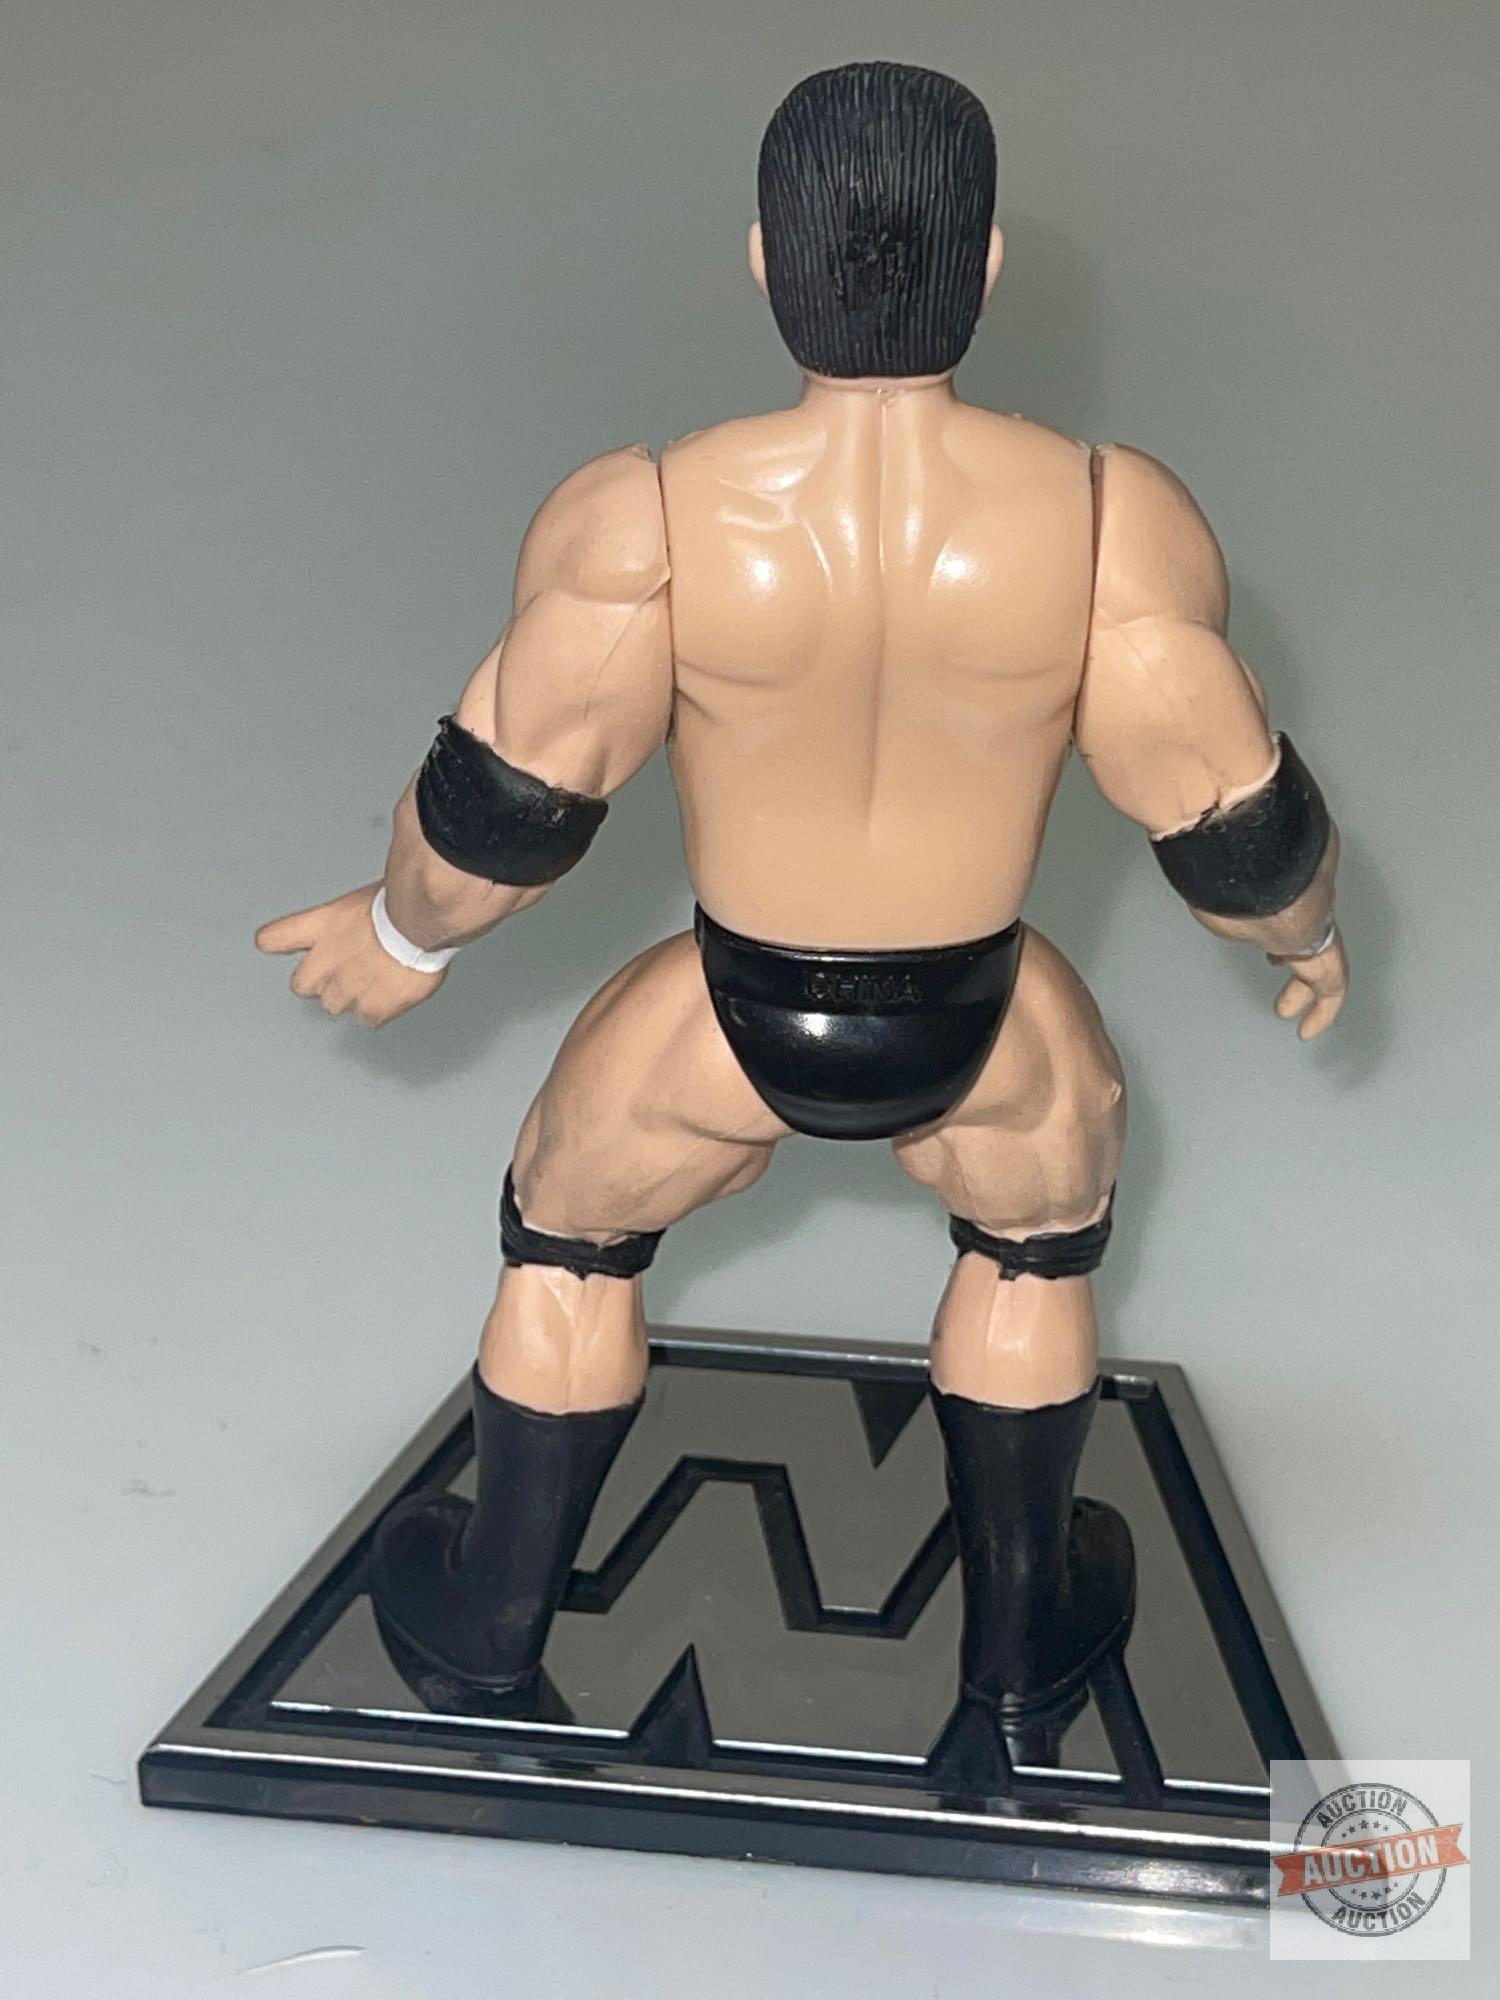 Toys - WWF 5 Wrestling Auction Figures, 1996, 6", 4 stands, 5x's the money